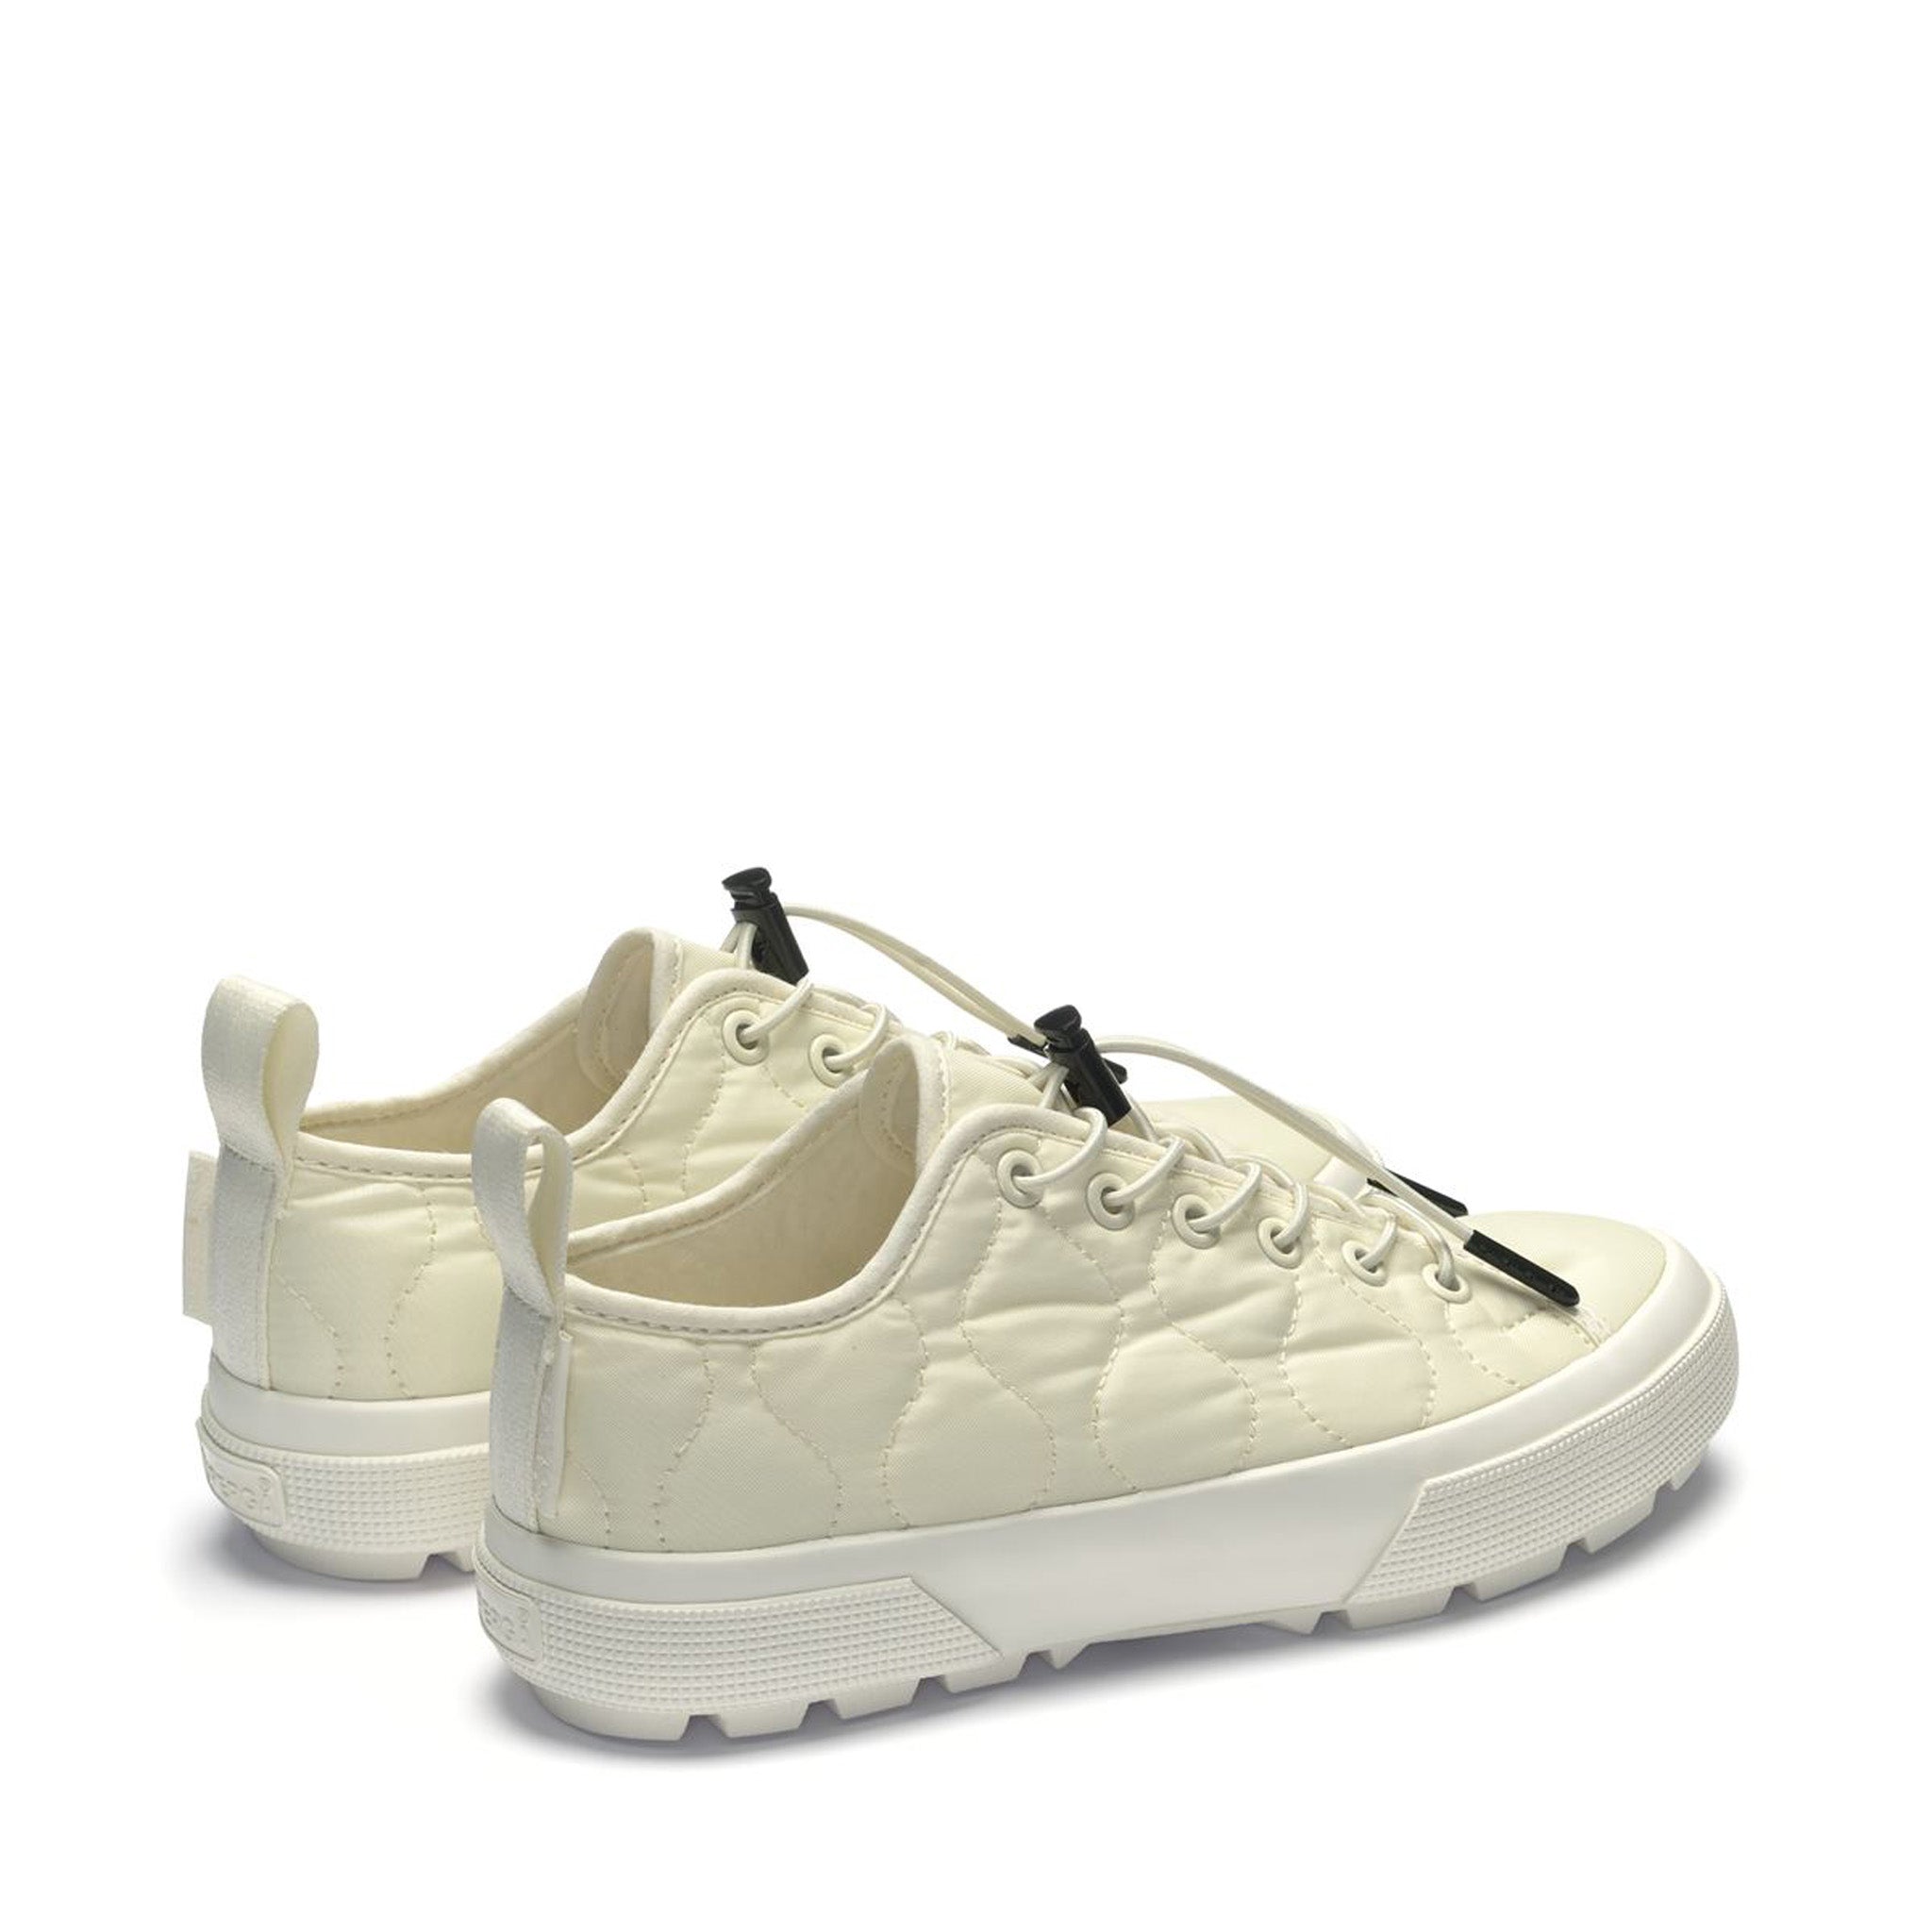 2625 Tank Quilted Nylon Sneakers - Beige Natural Avorio. Back view.